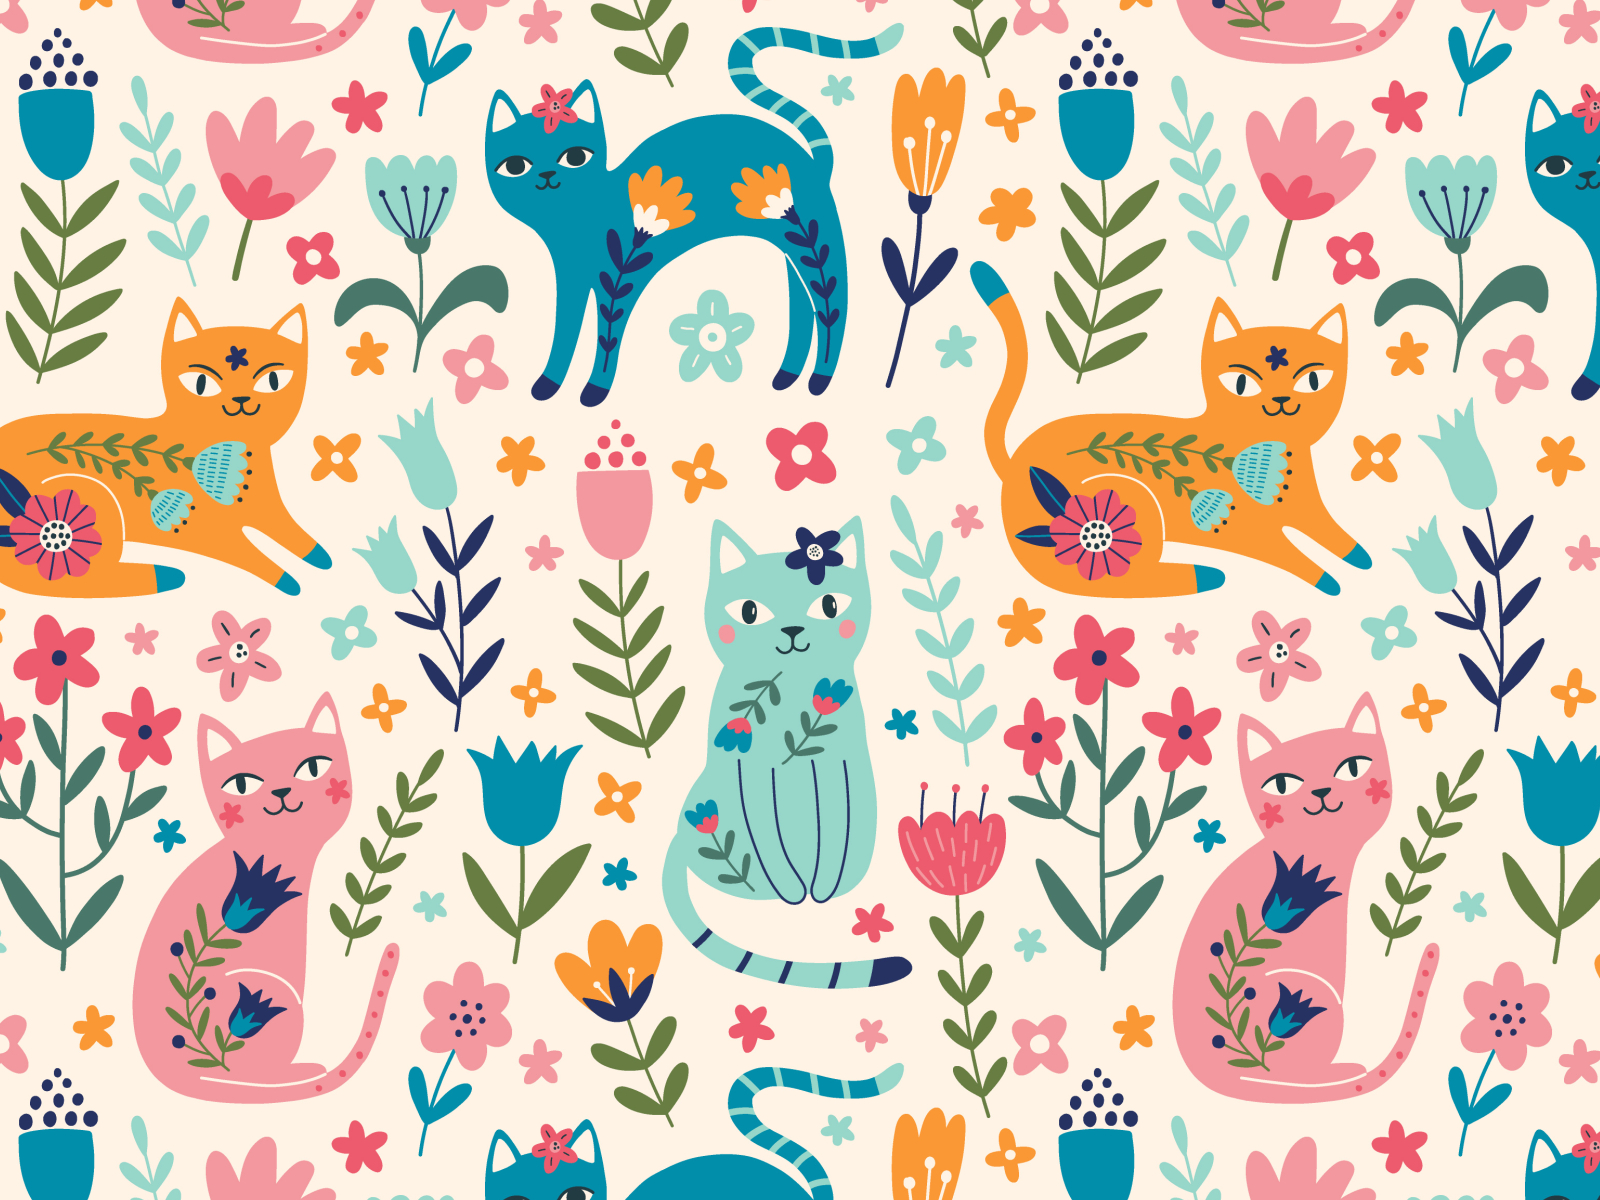 Pattern with cats and flowers by IrinaOstapenko on Dribbble